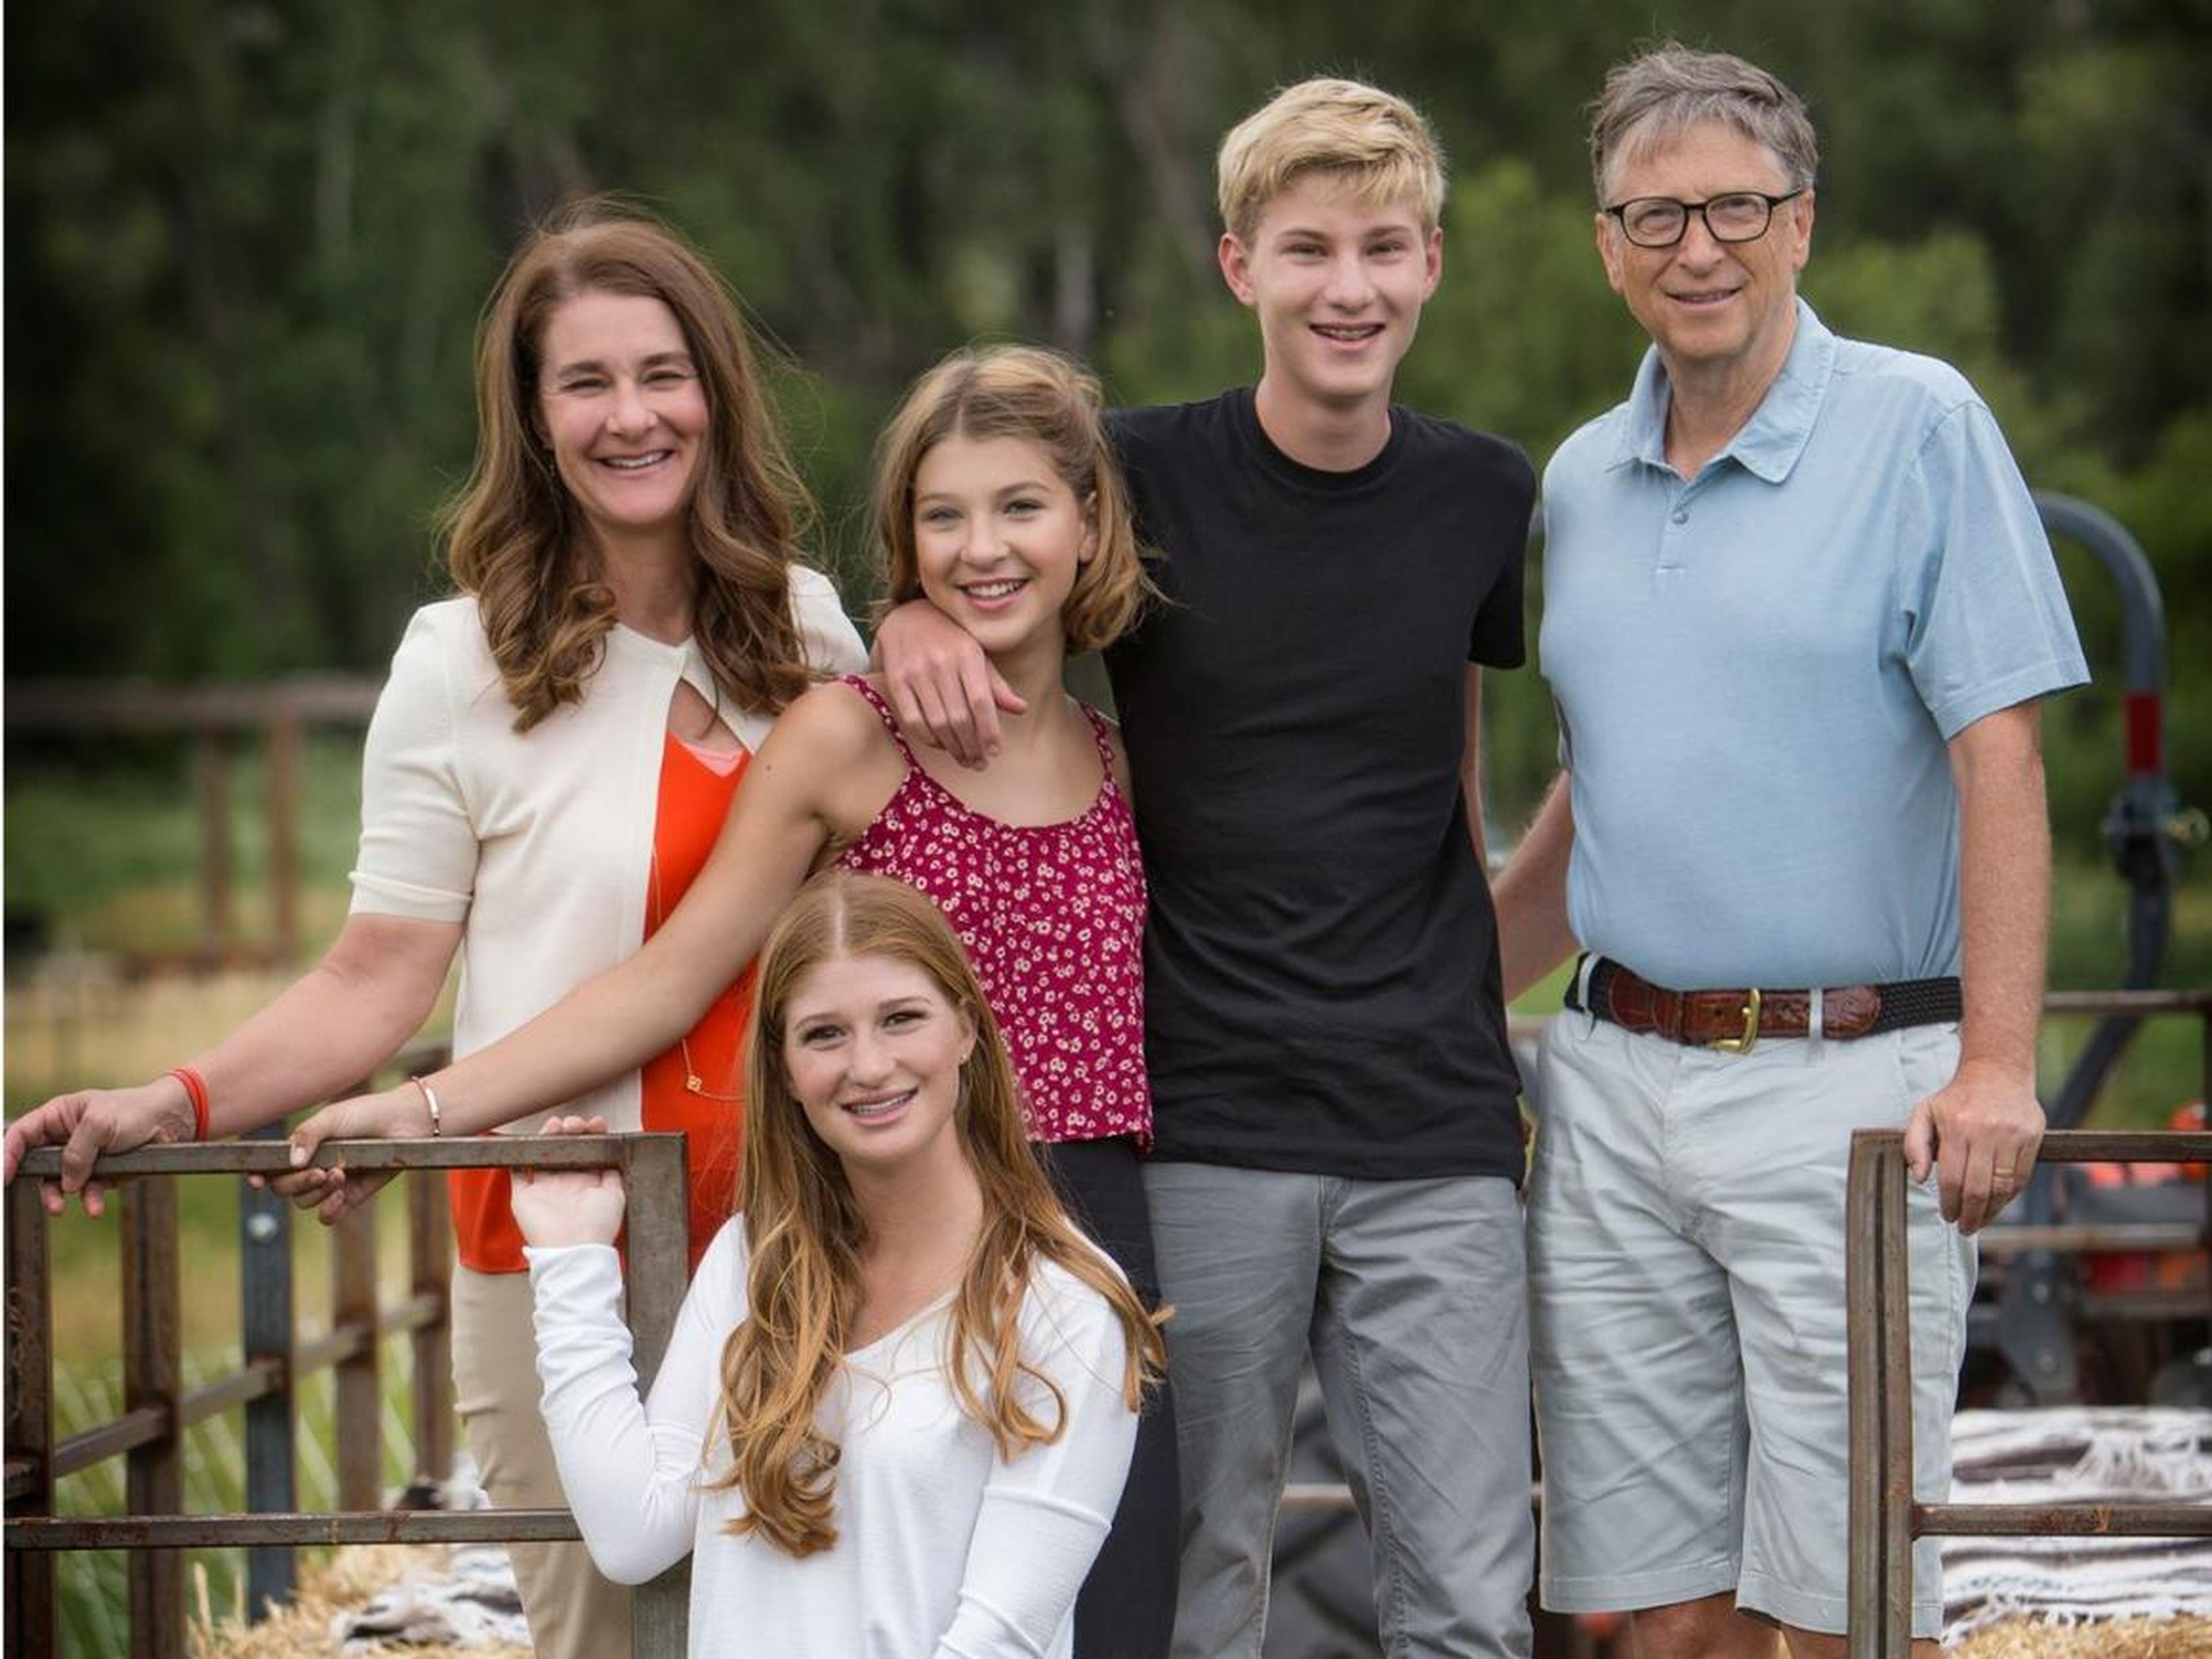 The Gates family, from left to right: Melinda, Jennifer (front), Phoebe, Rory, and Bill.